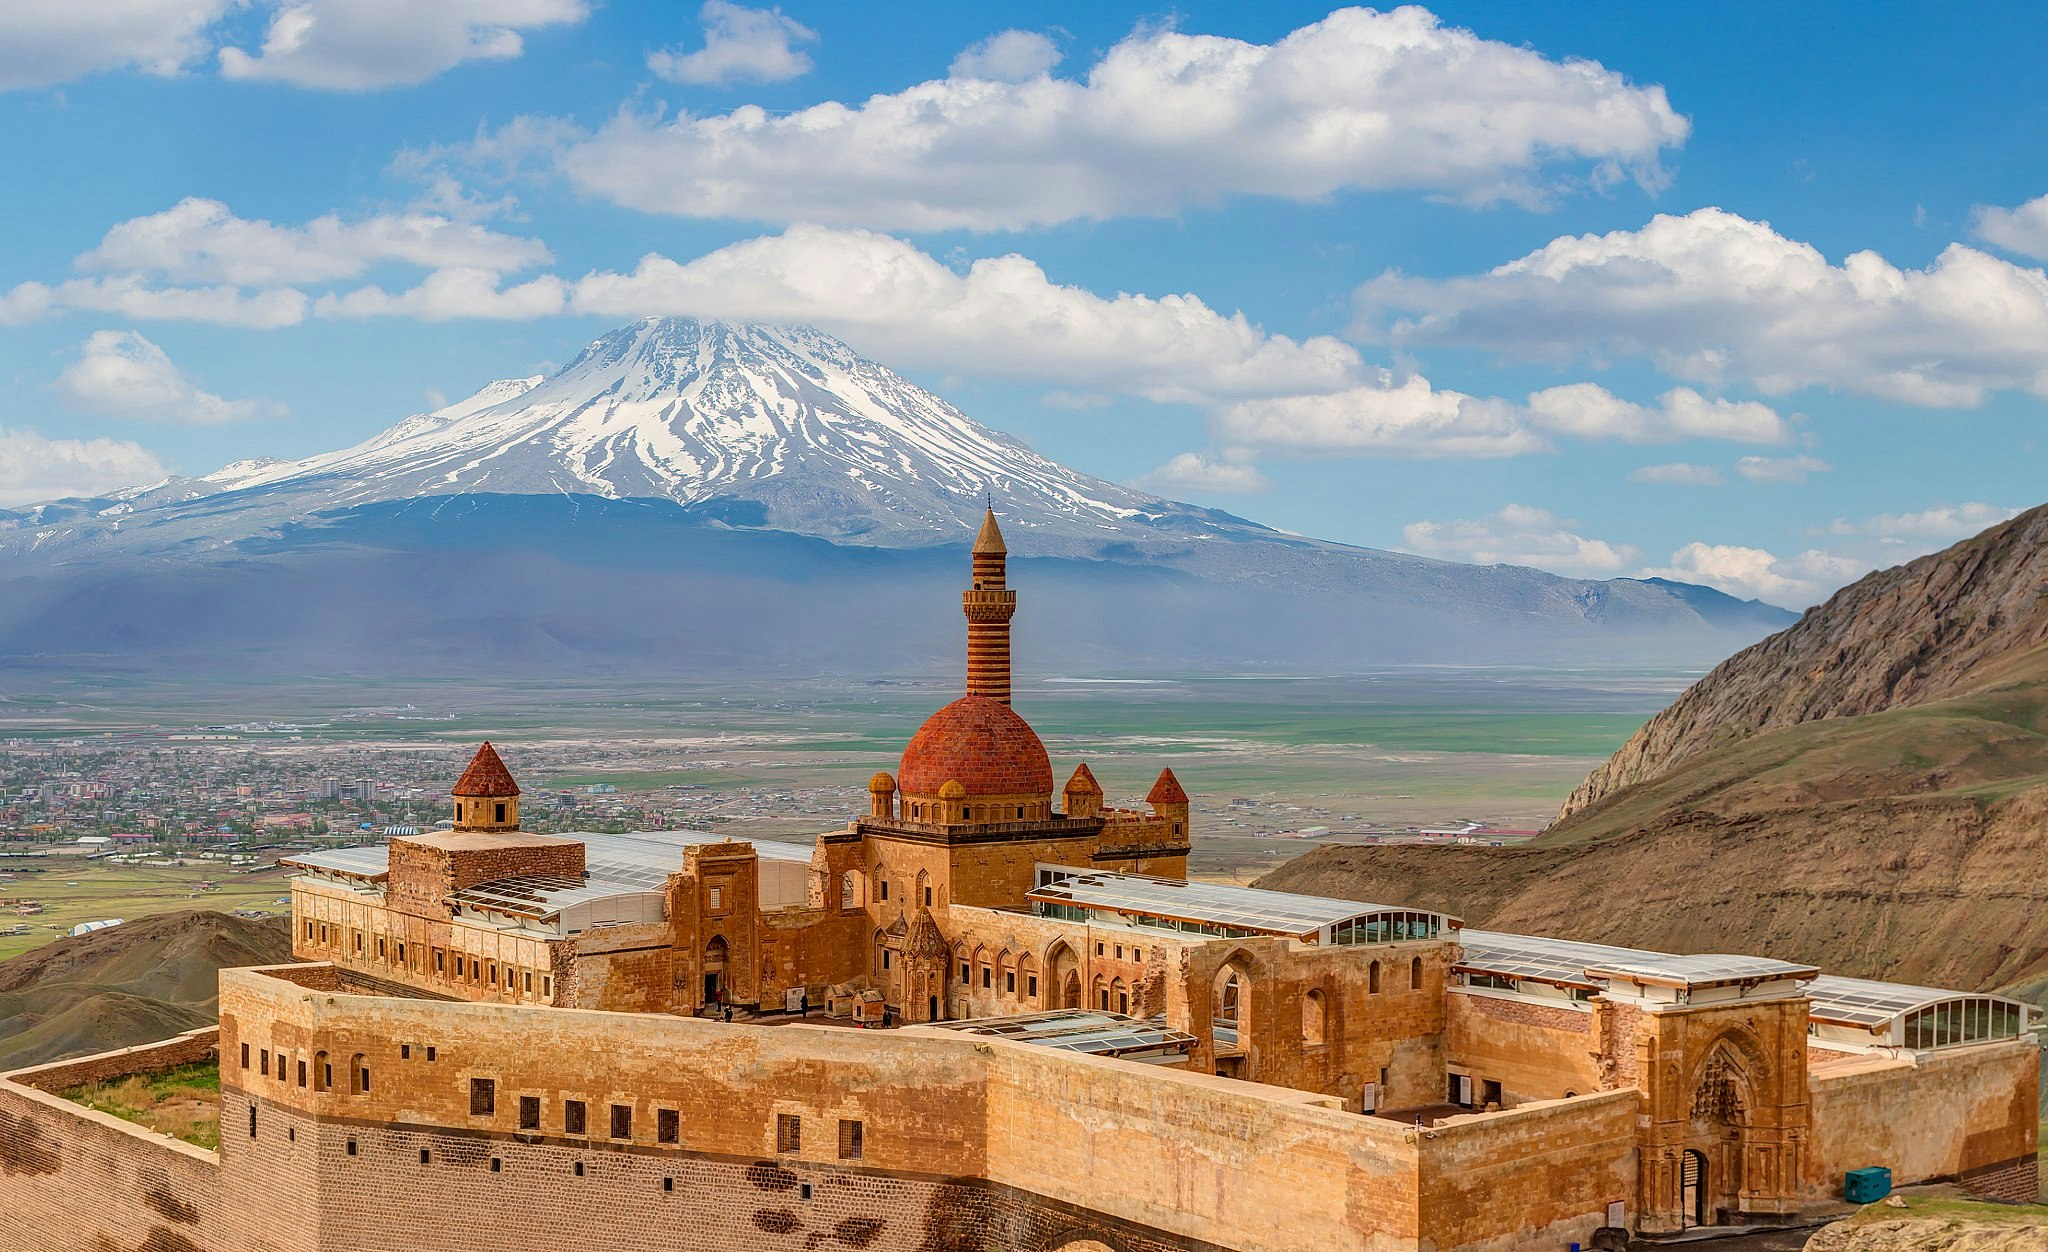 A sandstone-coloured palace with a minaret and red domes stands on a small plateau with a town in the valley below and a huge snow-capped mountain in the distance.